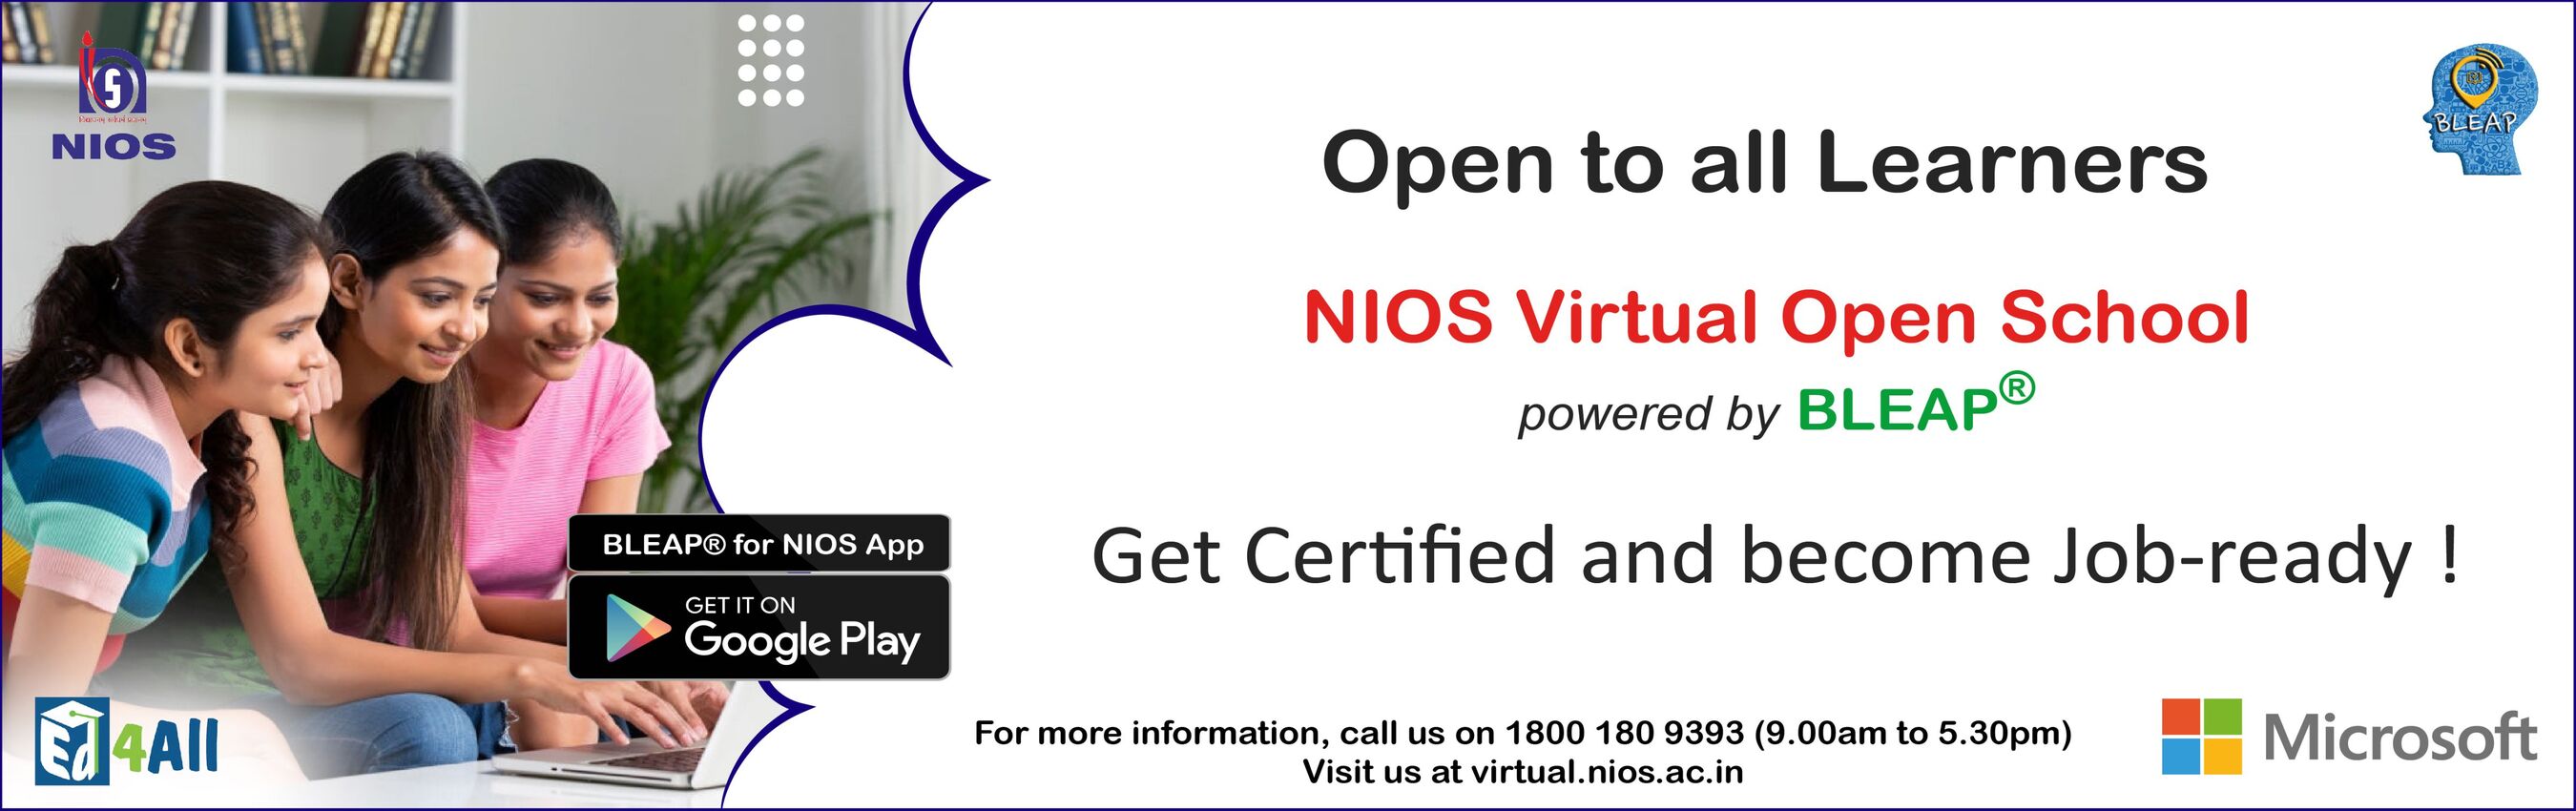  NIOS launches BLEAP for NIOS with Ed4All and Microsoft